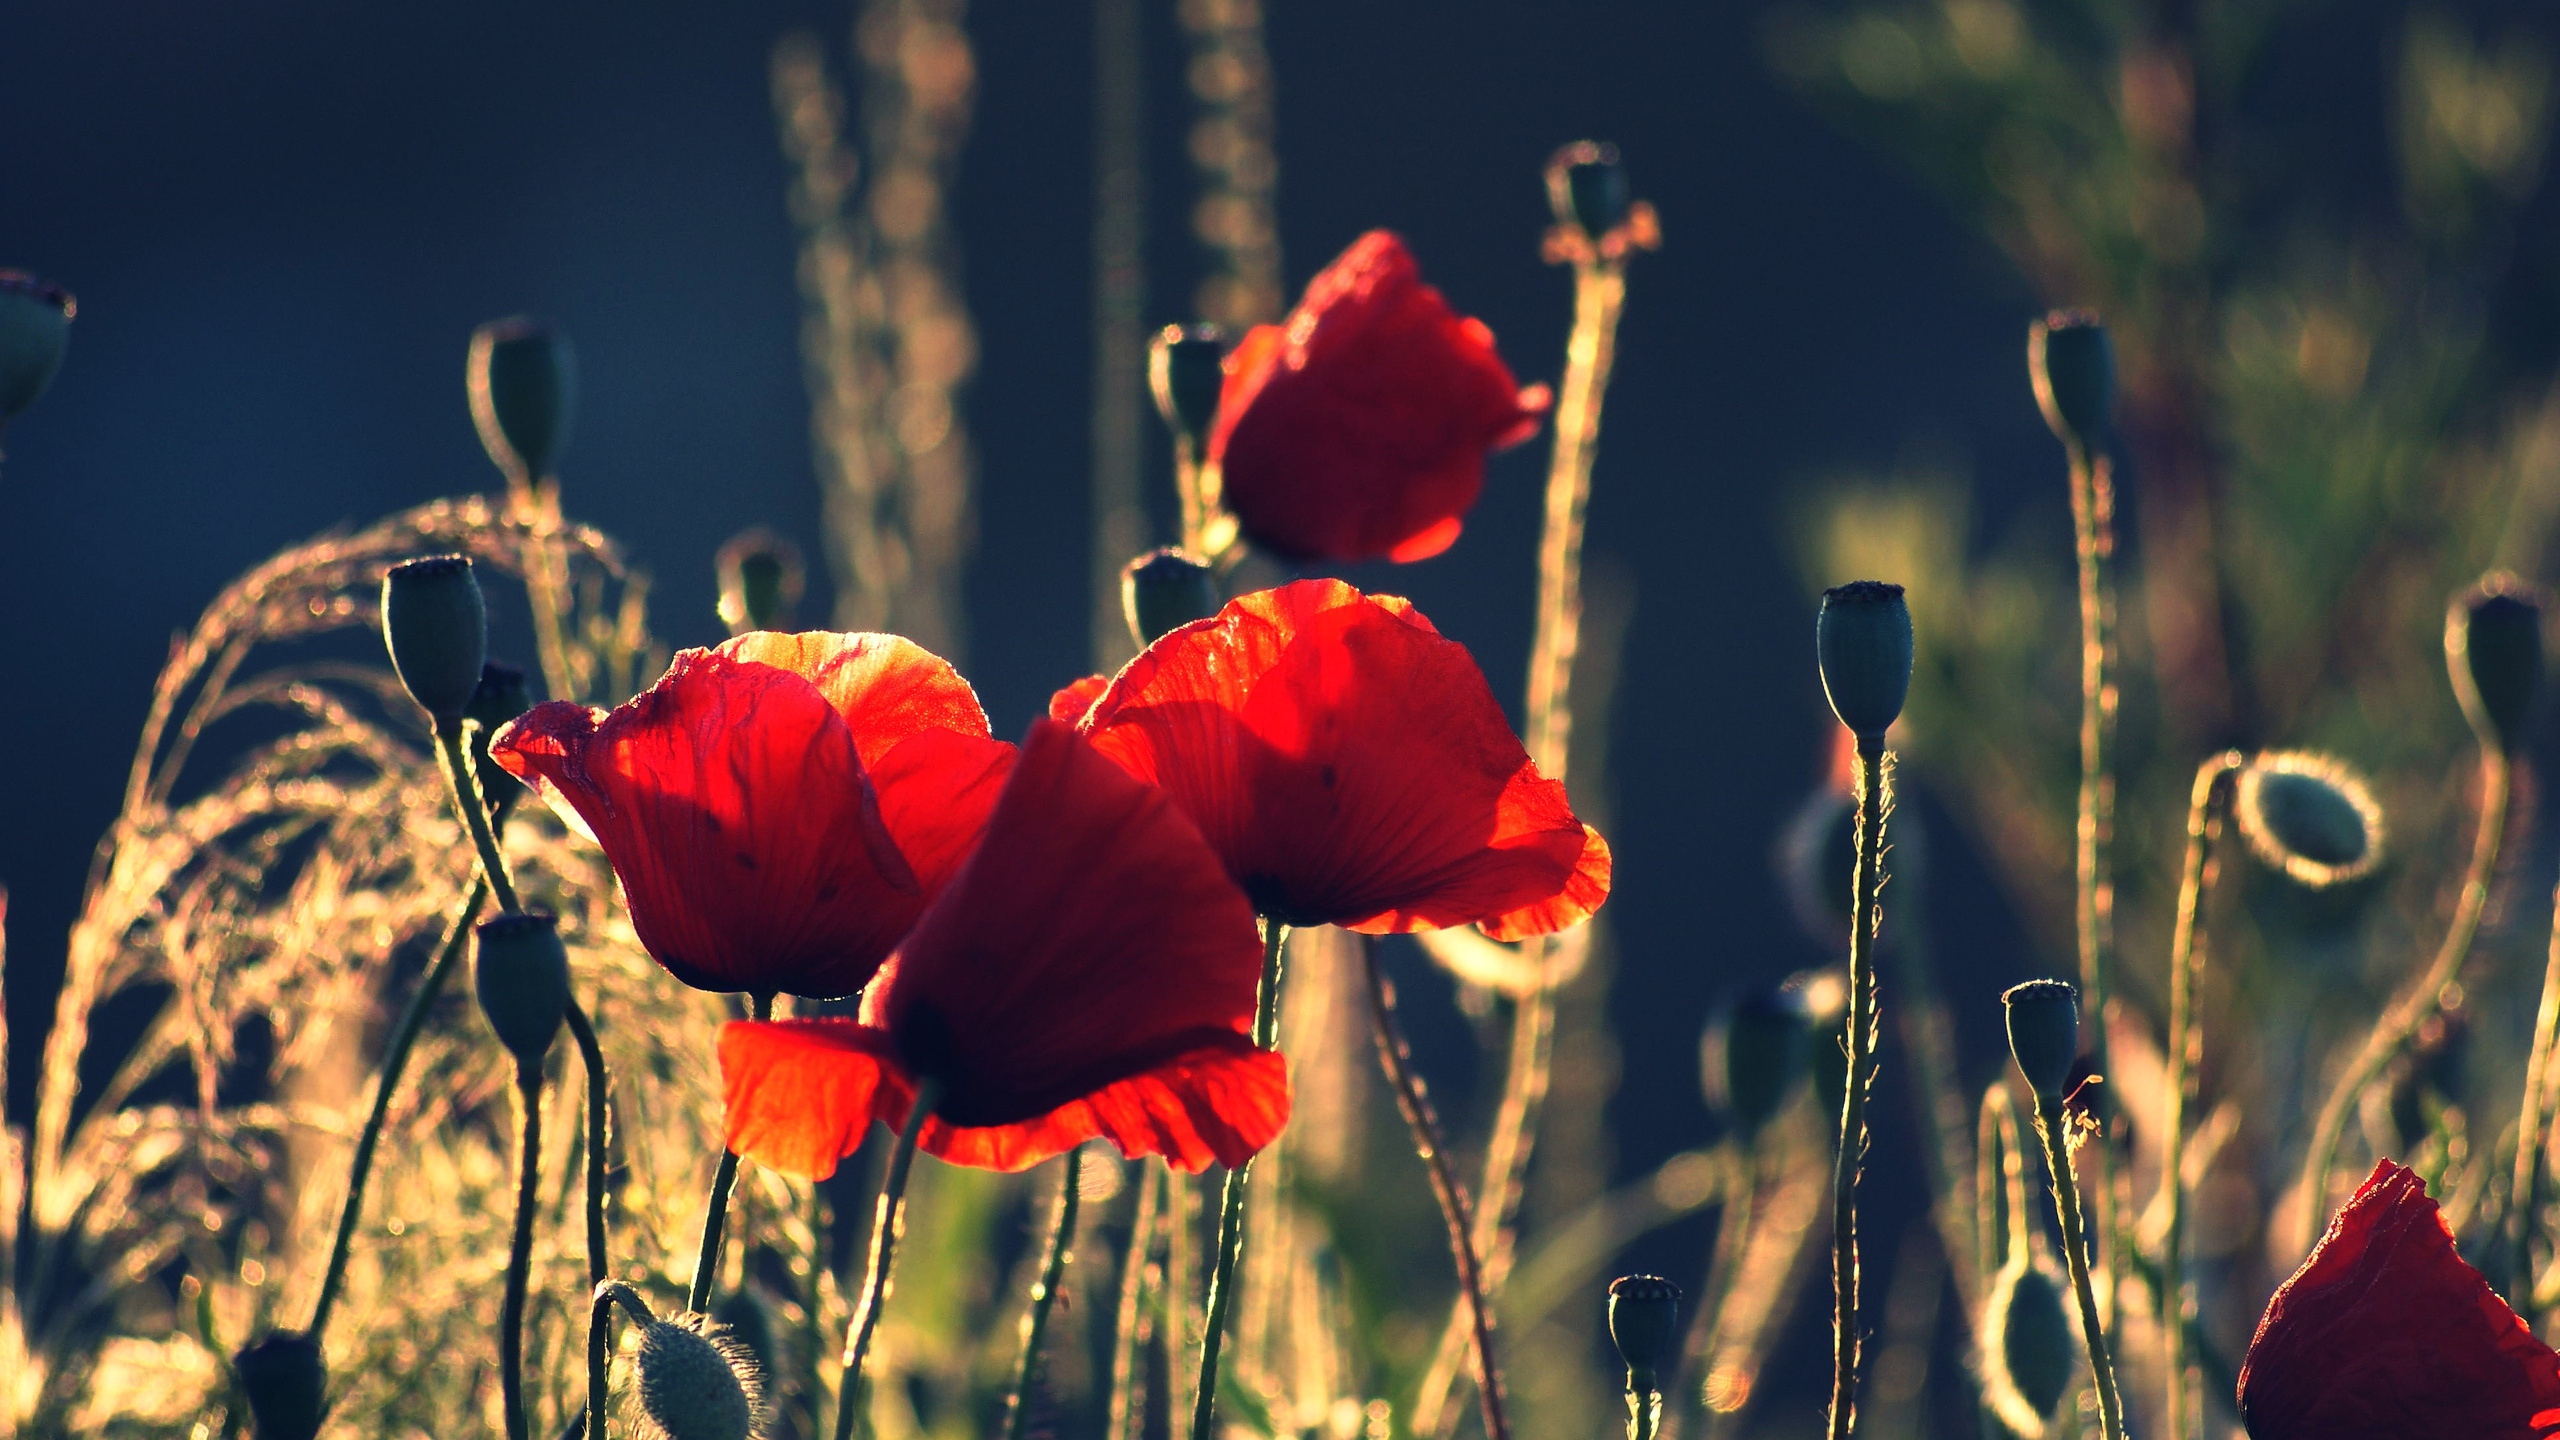 poppies_boxes_night_summer_20988_2560x1440